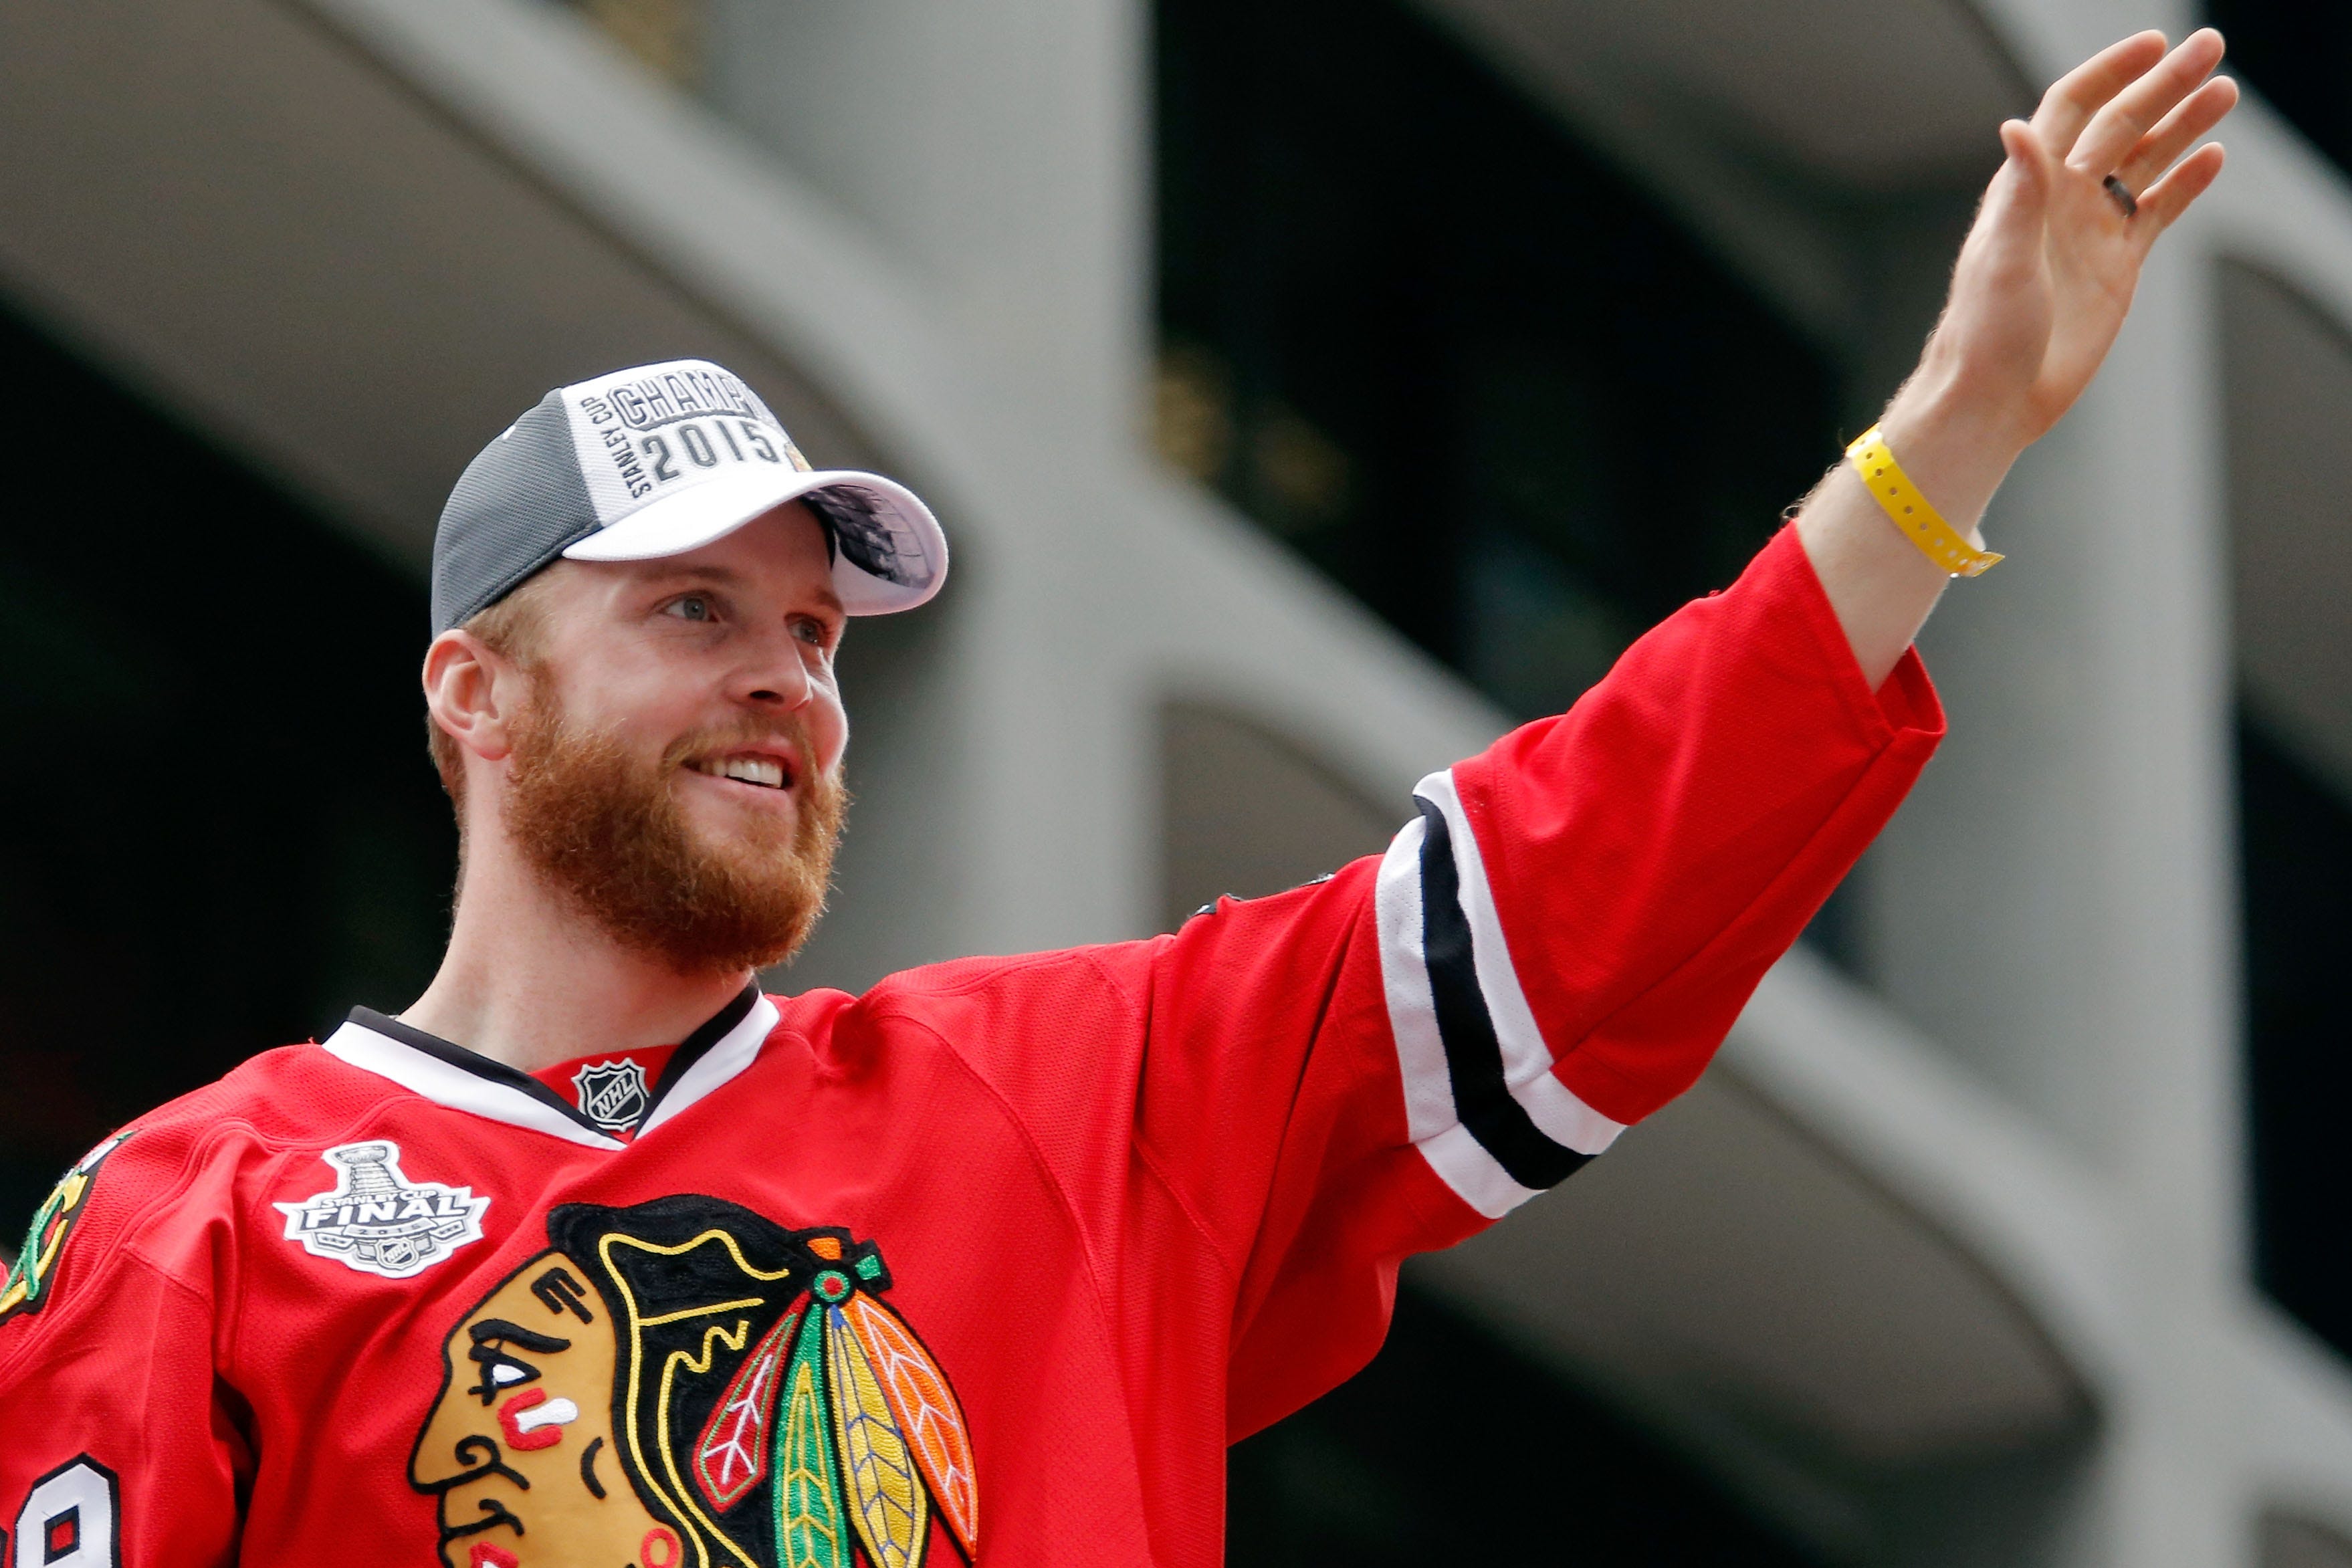 Cup winner Bryan Bickell too busy to lament about MS ending his career